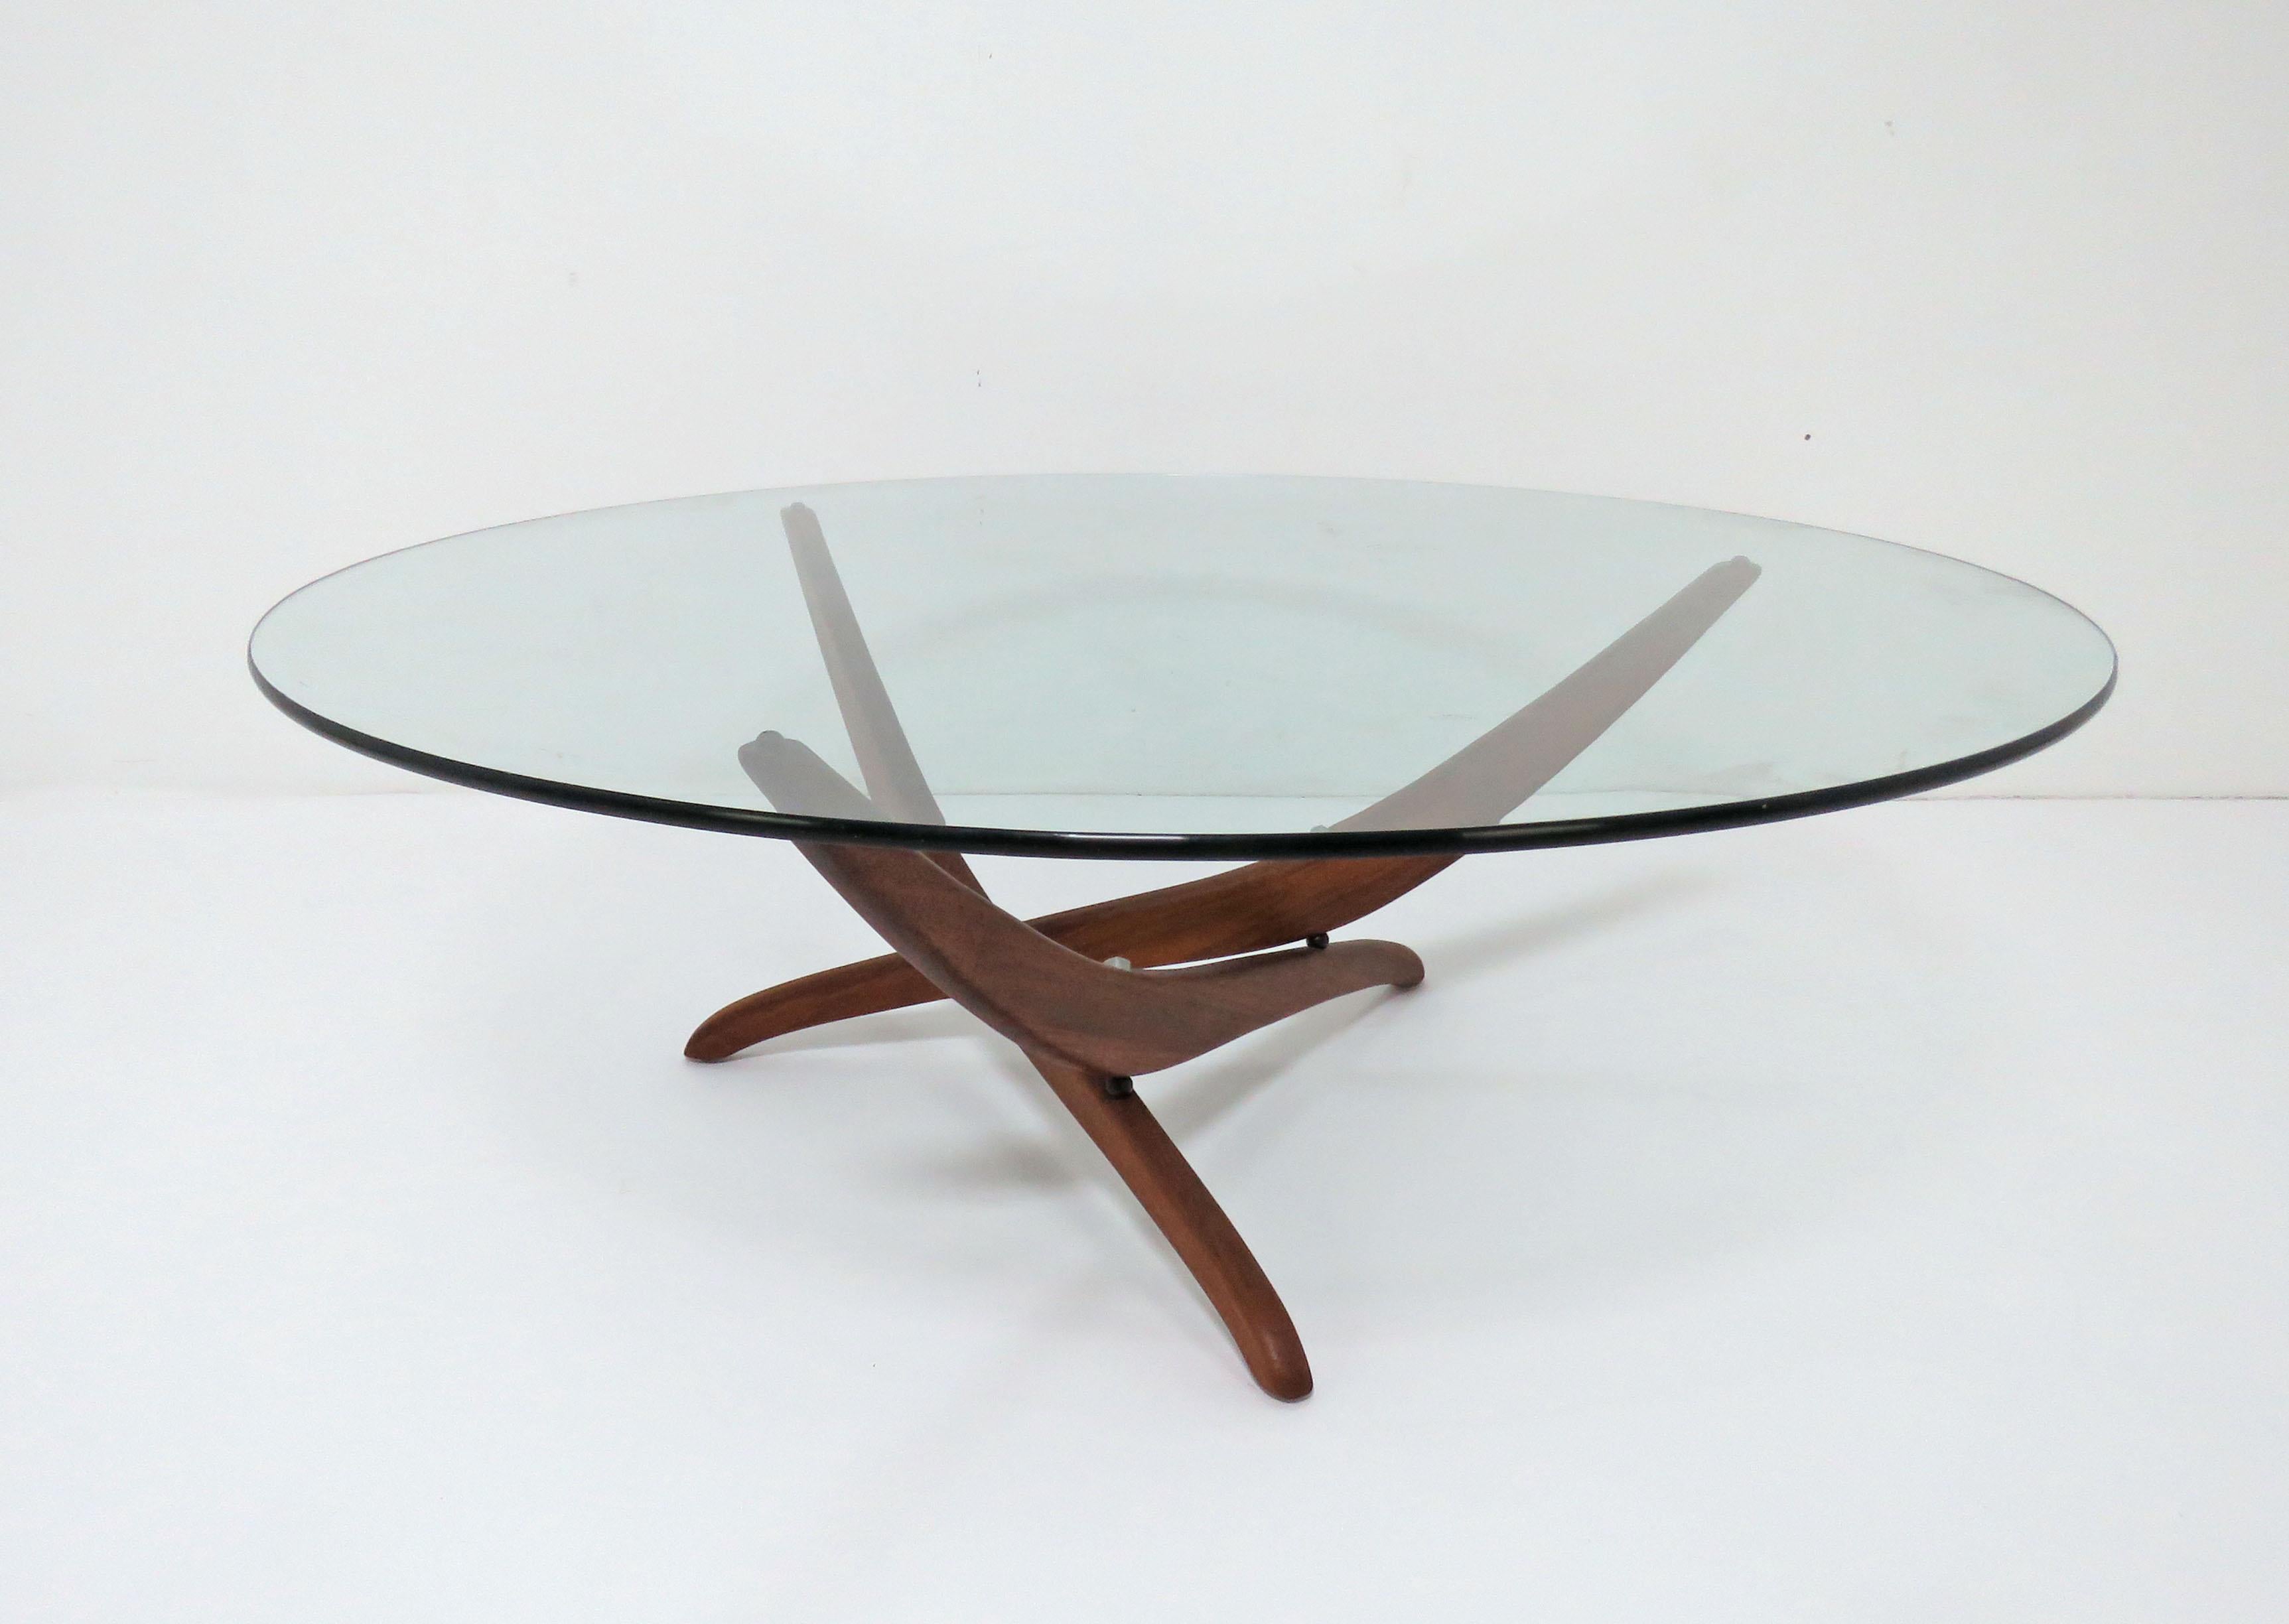 American coffee table in the Danish modern style, sculptural walnut base with aluminum fasteners, designed by Forest Wilson, circa 1960s.